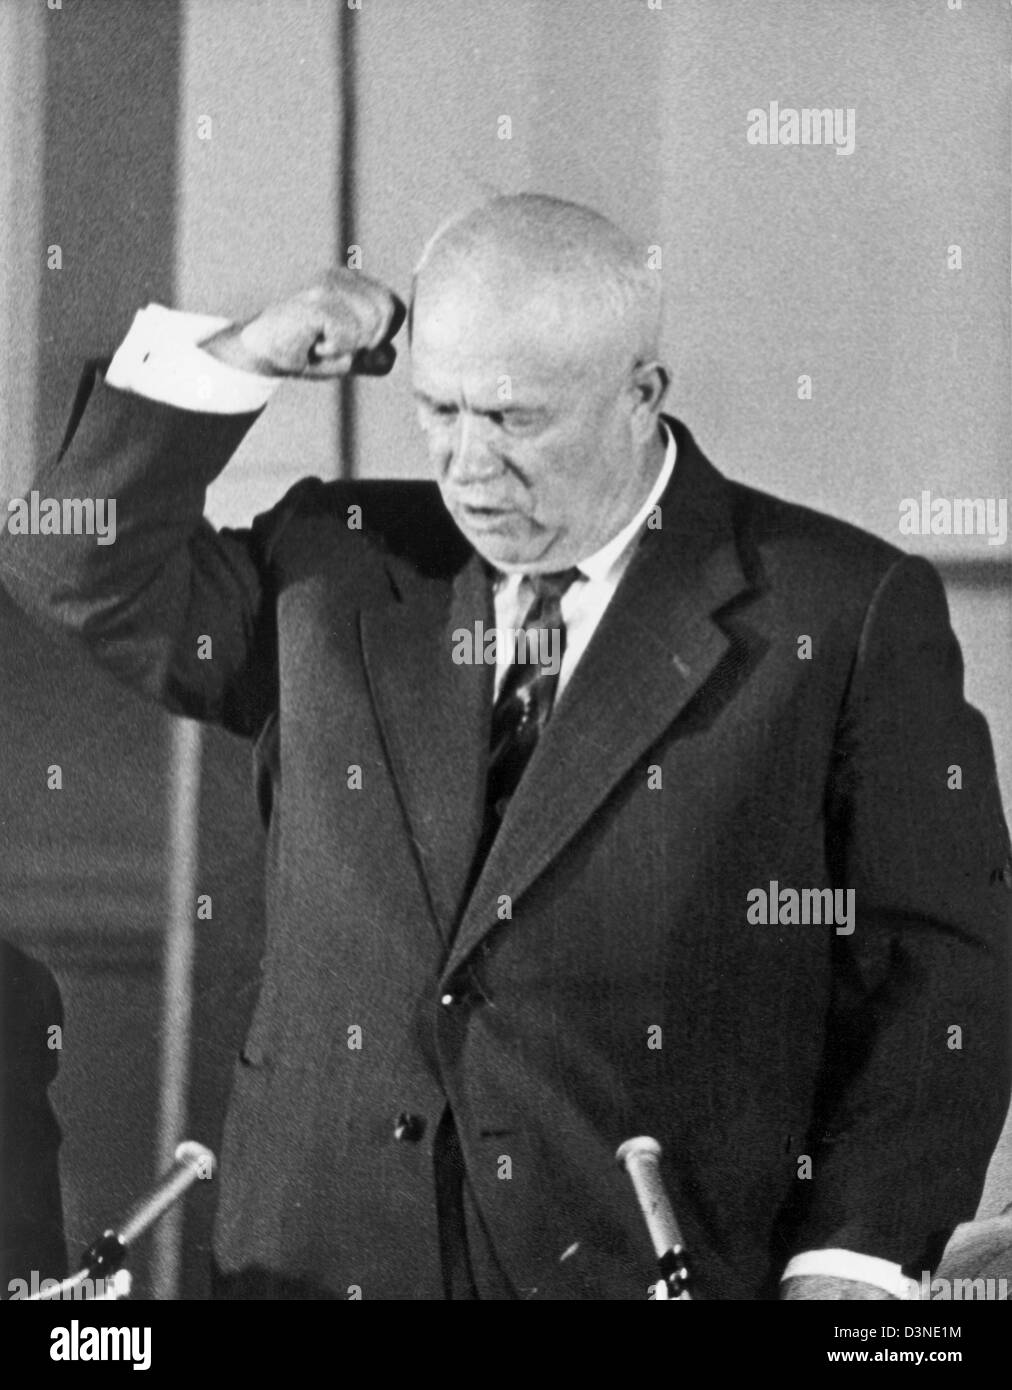 Soviet Prime Minister Nikita Khrushchev pictured during a press conference at Palais Chaillot in Paris, 18 May 1960. In the case of further border violations by American aeroplanes, he announced, the planes and their bases would be attacked. Photo: Otto Noecker Stock Photo